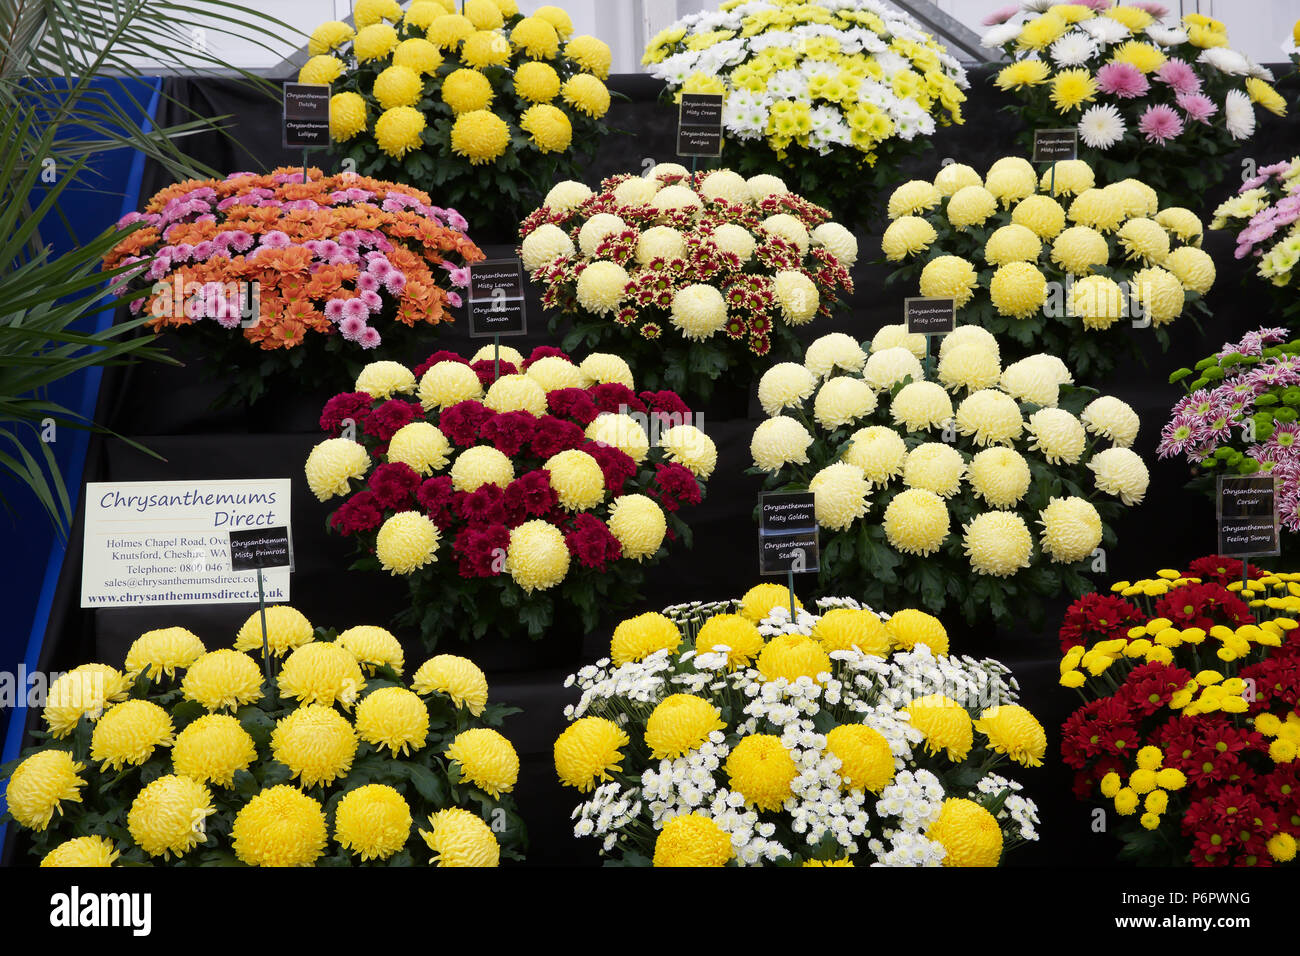 East Molesey, UK. 2nd July, 2018. Chrysanthemums on display on Press Day takes place at the RHS Hampton Court Palace Flower Show. The show runs from the 2nd-8th July 2018. It is the largest flower show in the world covering over 34 acres with the centre piece being the long walk. There are various gardens to admire and gain ideas from along with plant, flower stalls and various other garden features. Credit: Keith Larby/Alamy Live News Stock Photo